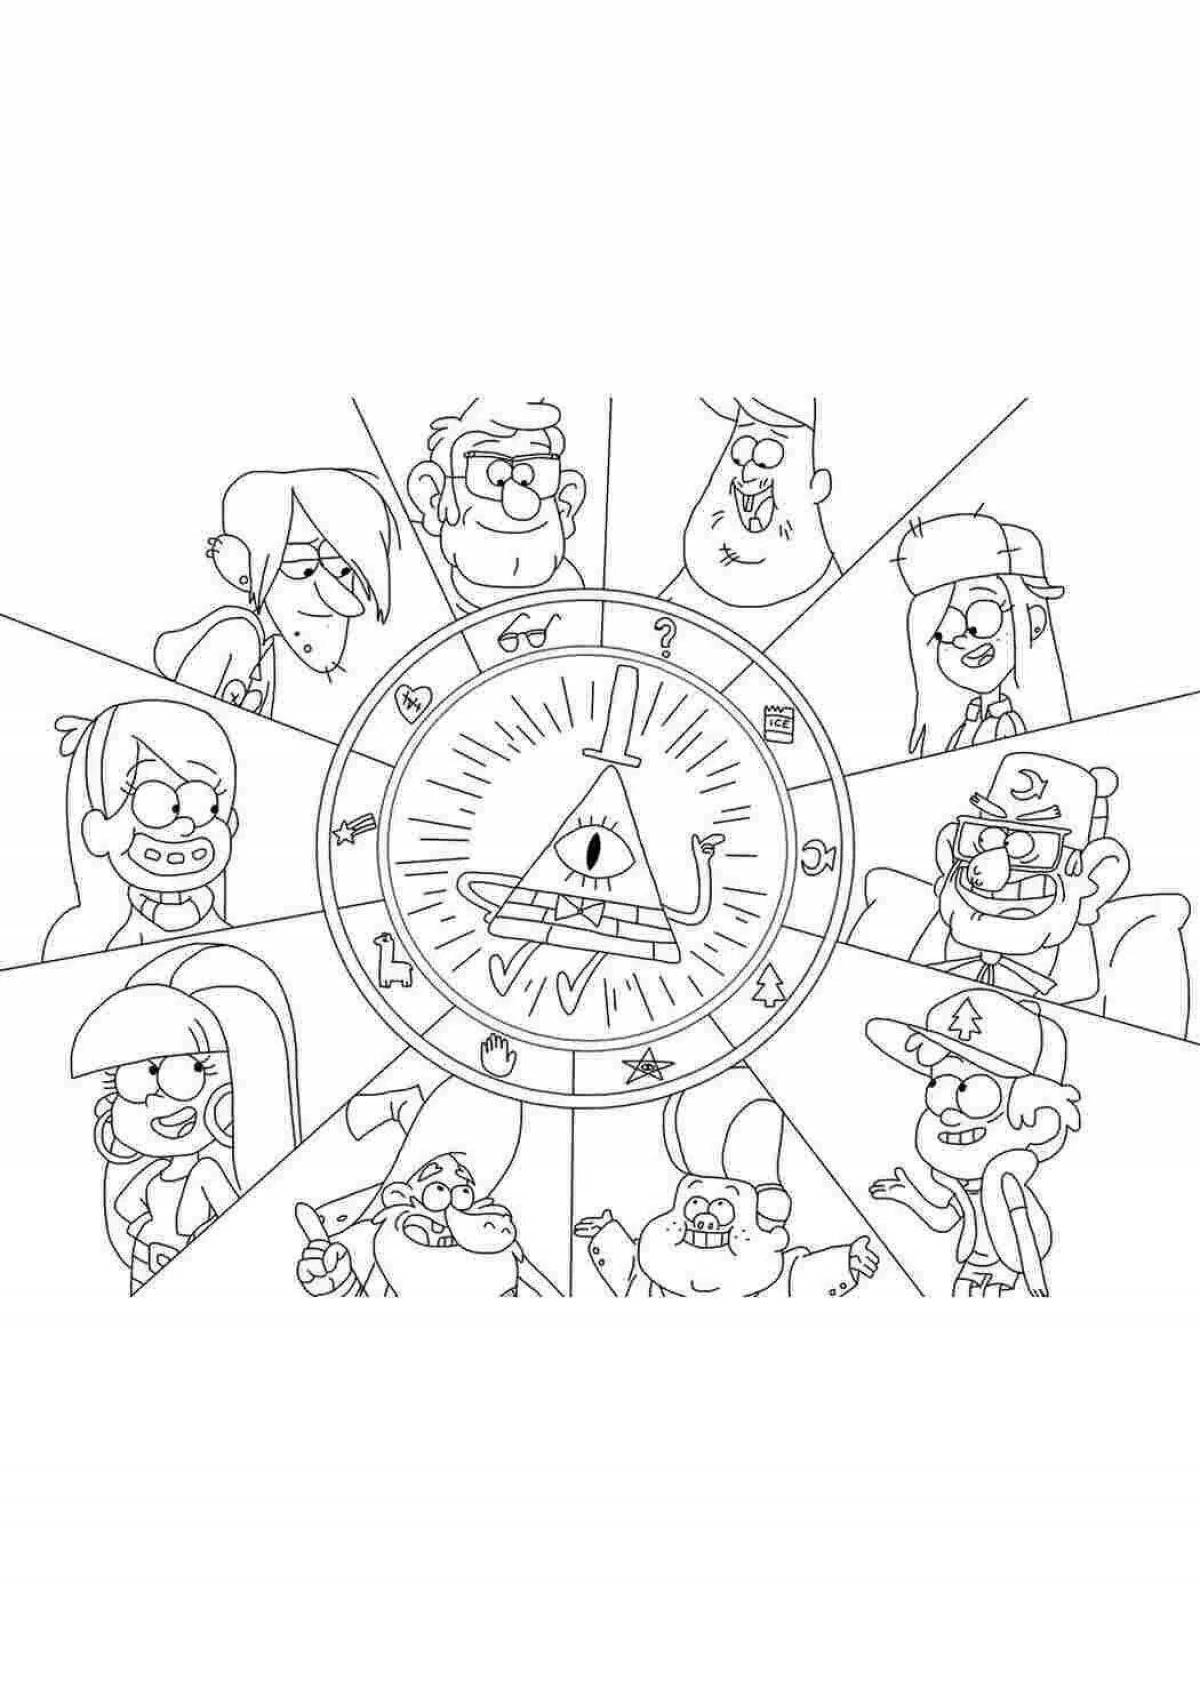 Colorful heroes of gravity falls